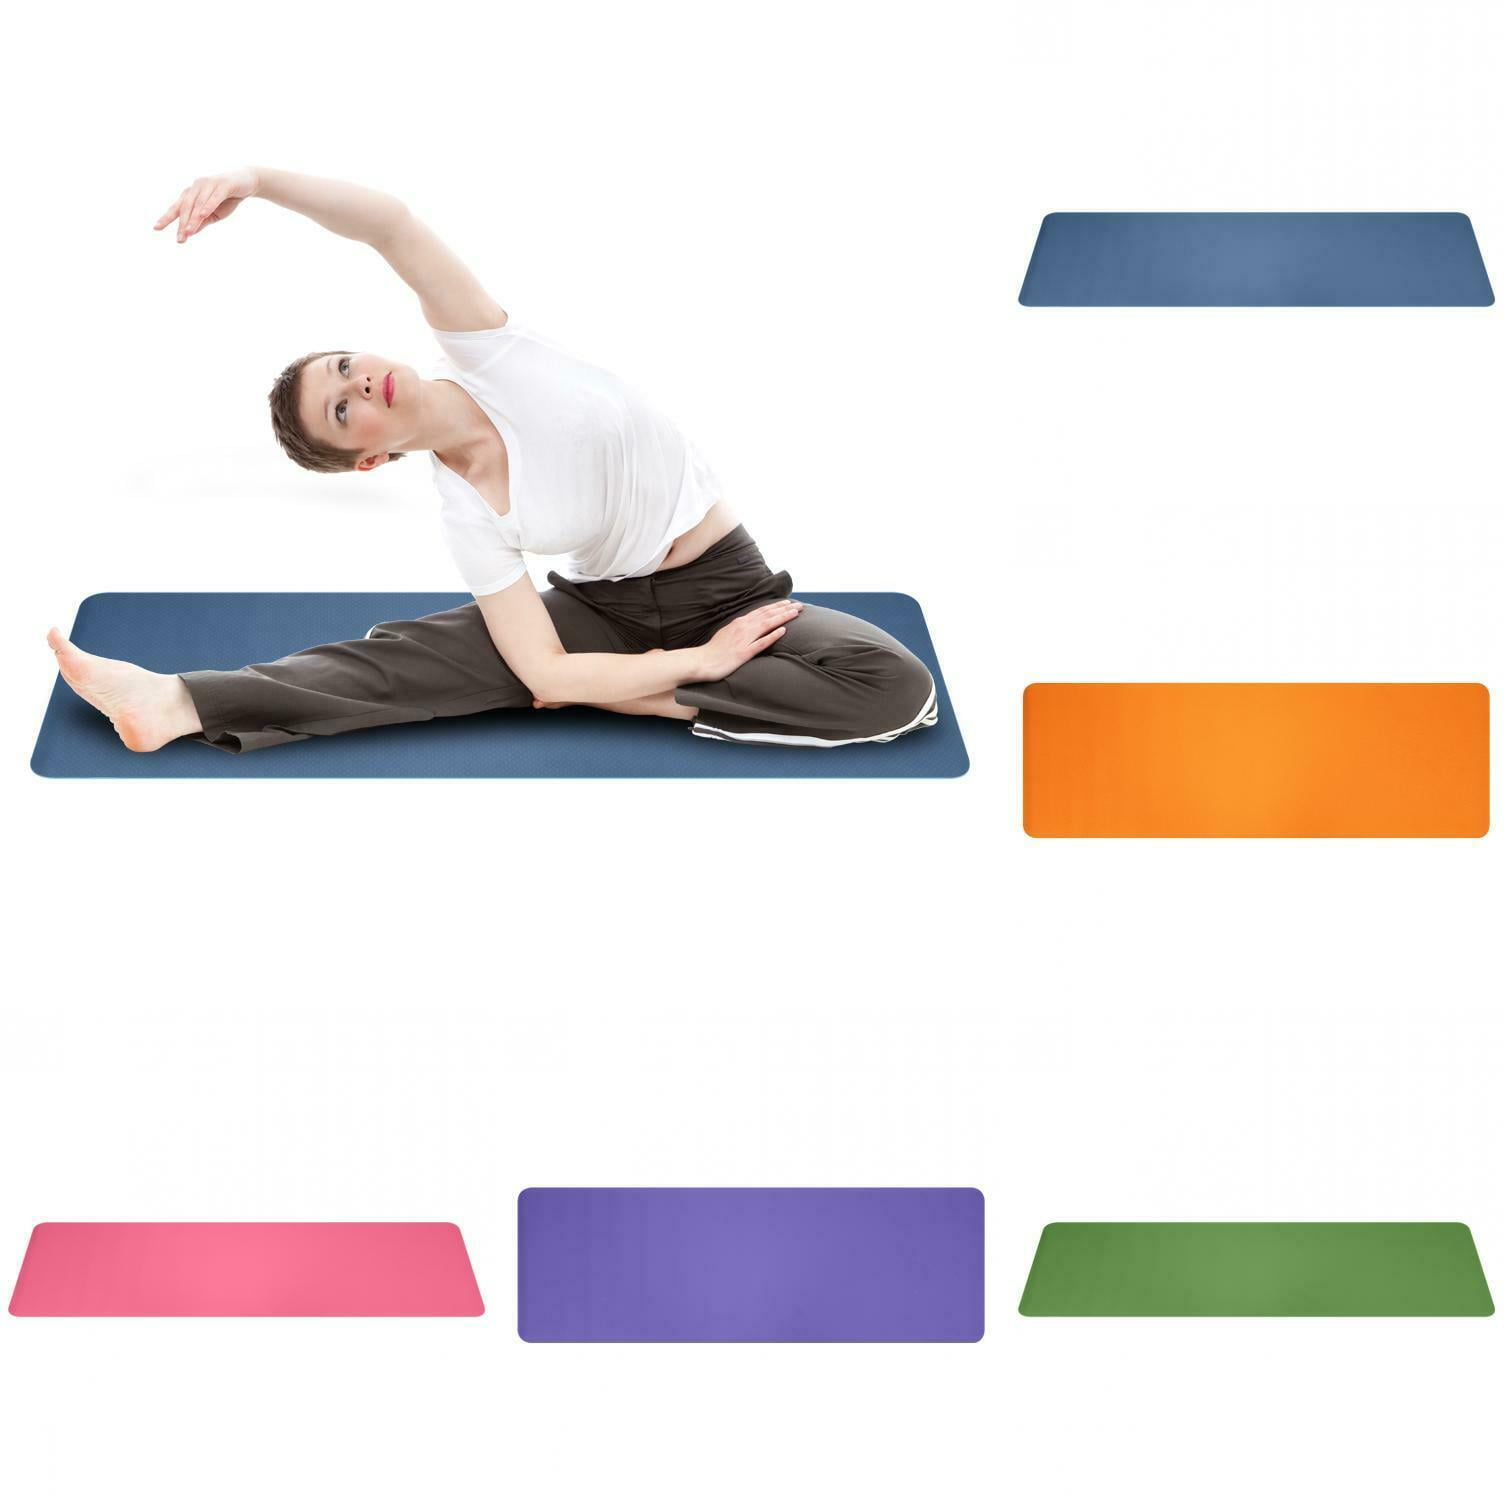 6mm Thick Yoga Mat Pilates Fitness Meditation Exercise Camping Gym Pad Non-Slip 